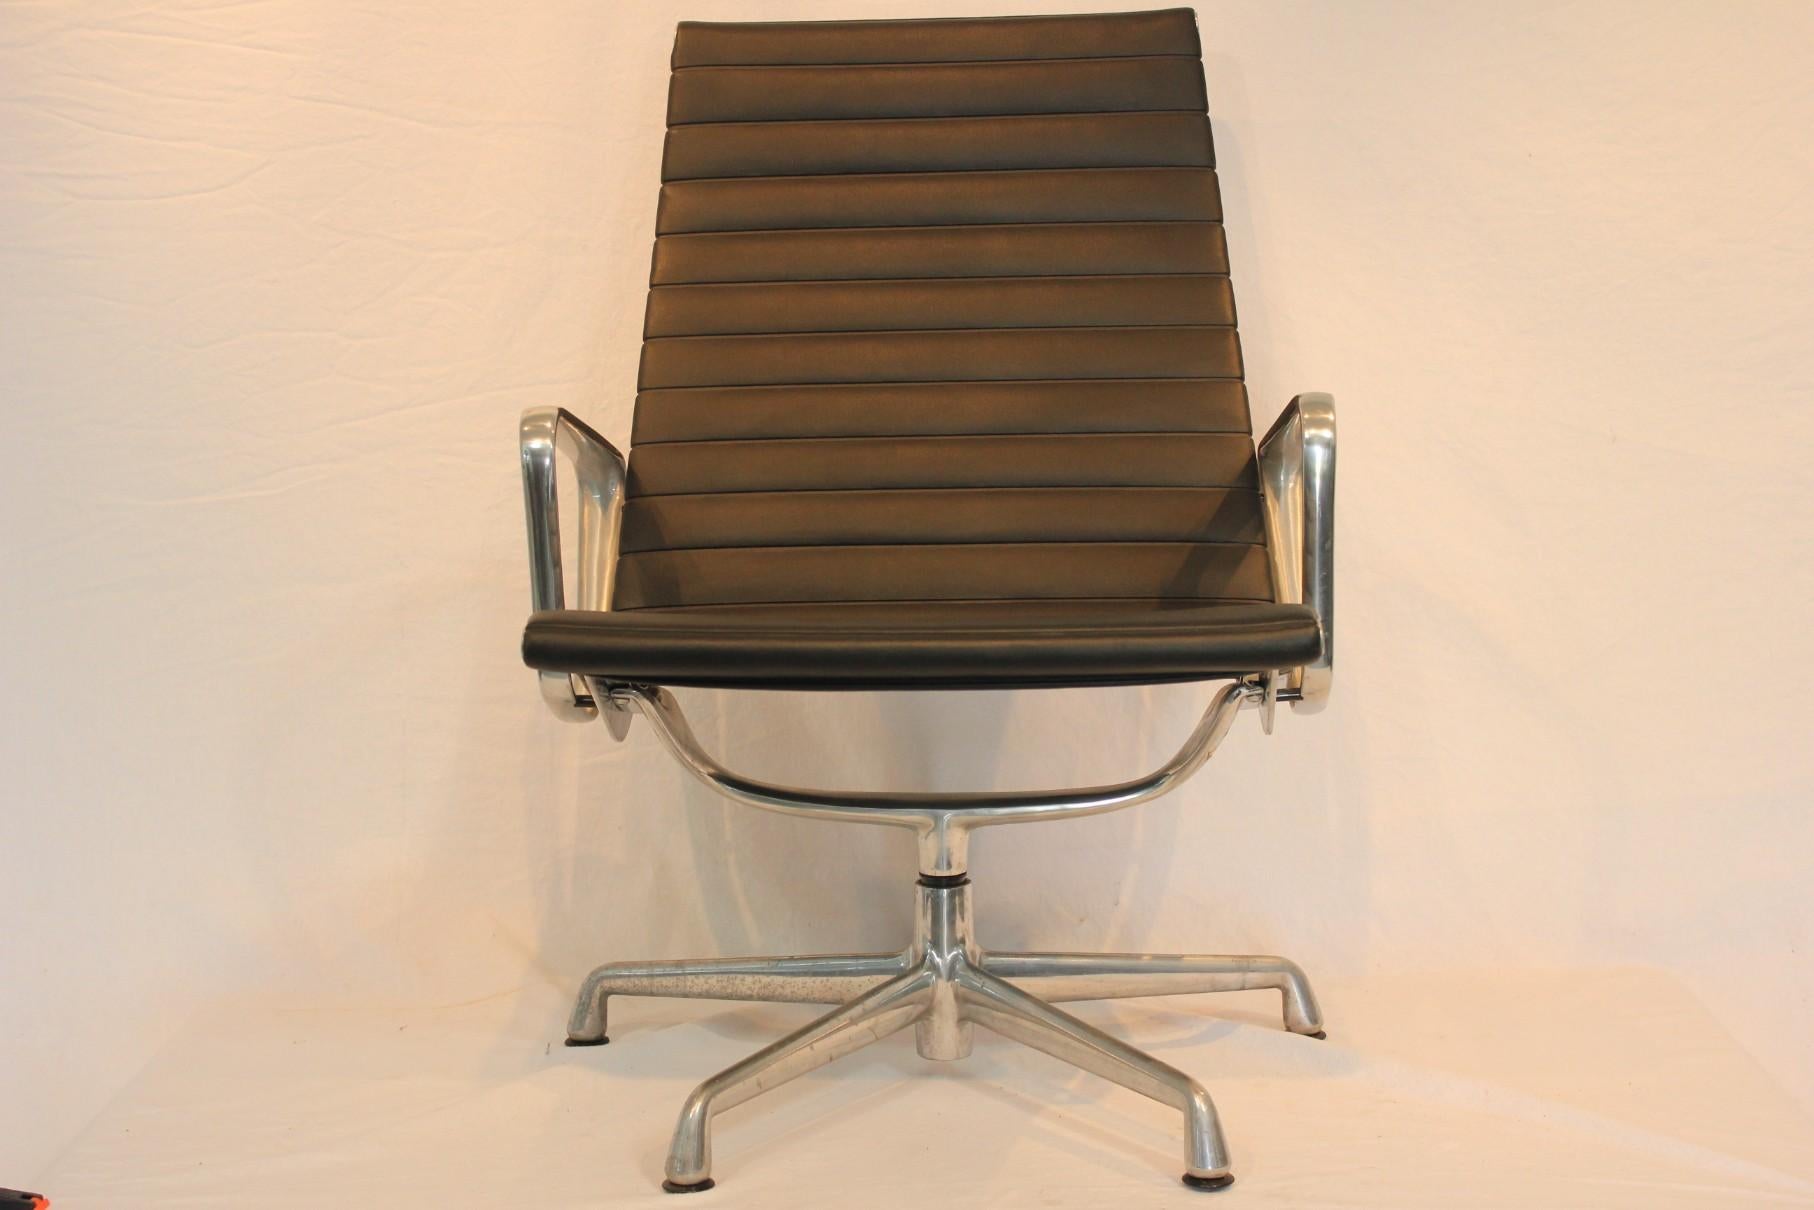 Mid 20th Century Herman Miller Group Management Aluminum Lounge Chair - Designed by Charles Eames. 5 Prong Base - Leather Upholstery.